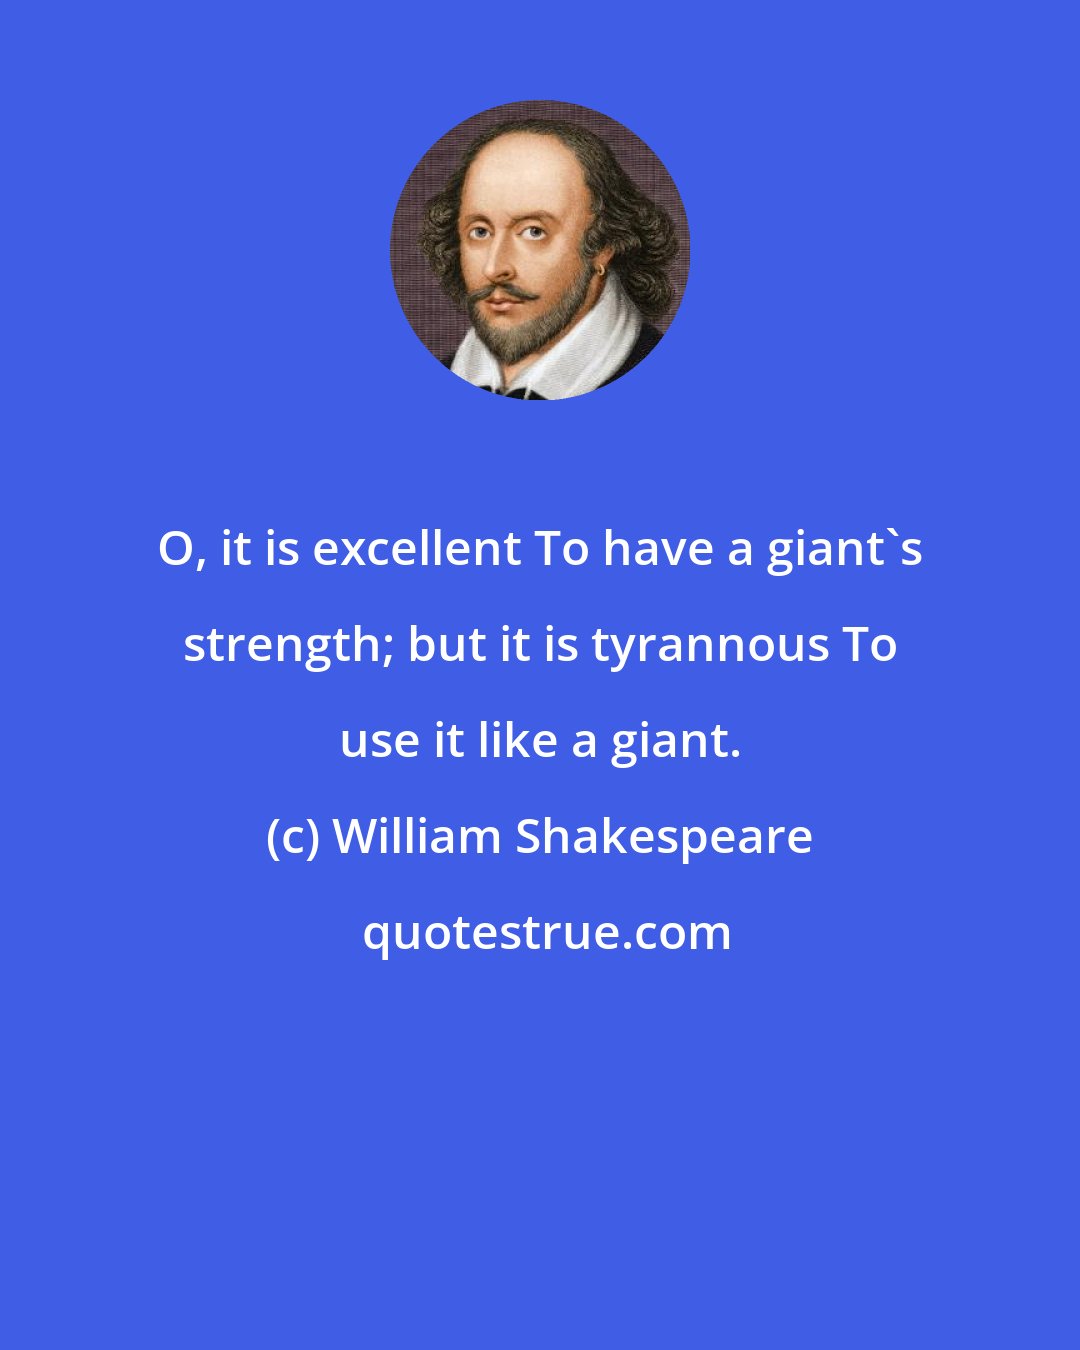 William Shakespeare: O, it is excellent To have a giant's strength; but it is tyrannous To use it like a giant.